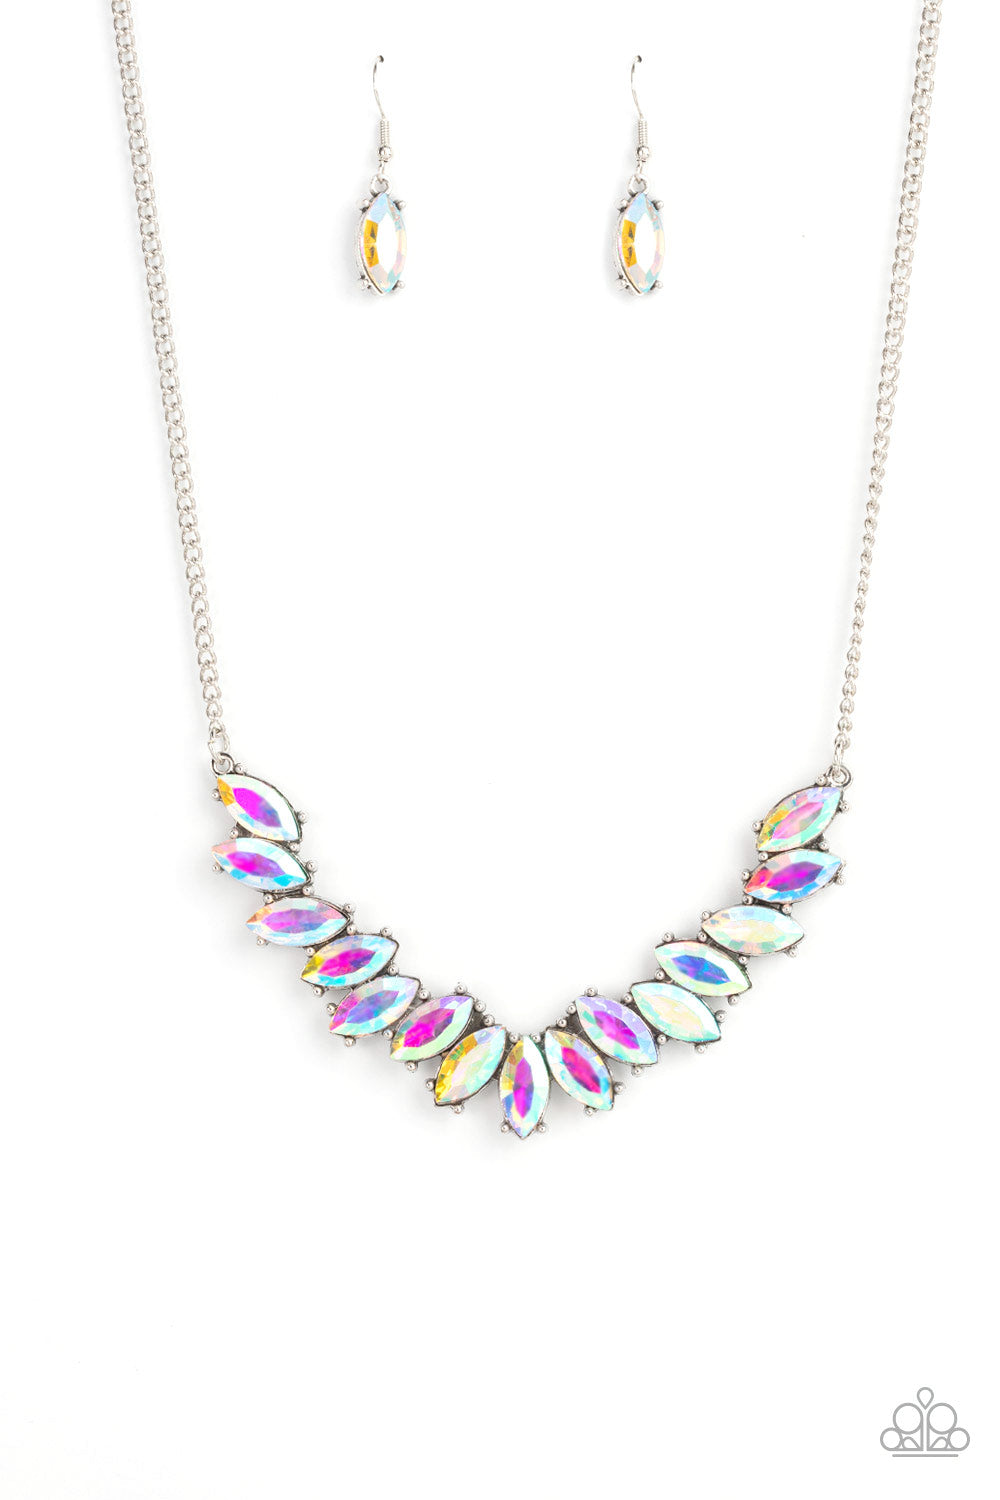 PREORDER - Galaxy Game-Changer - Multi Iridescent - Paparazzi Necklace